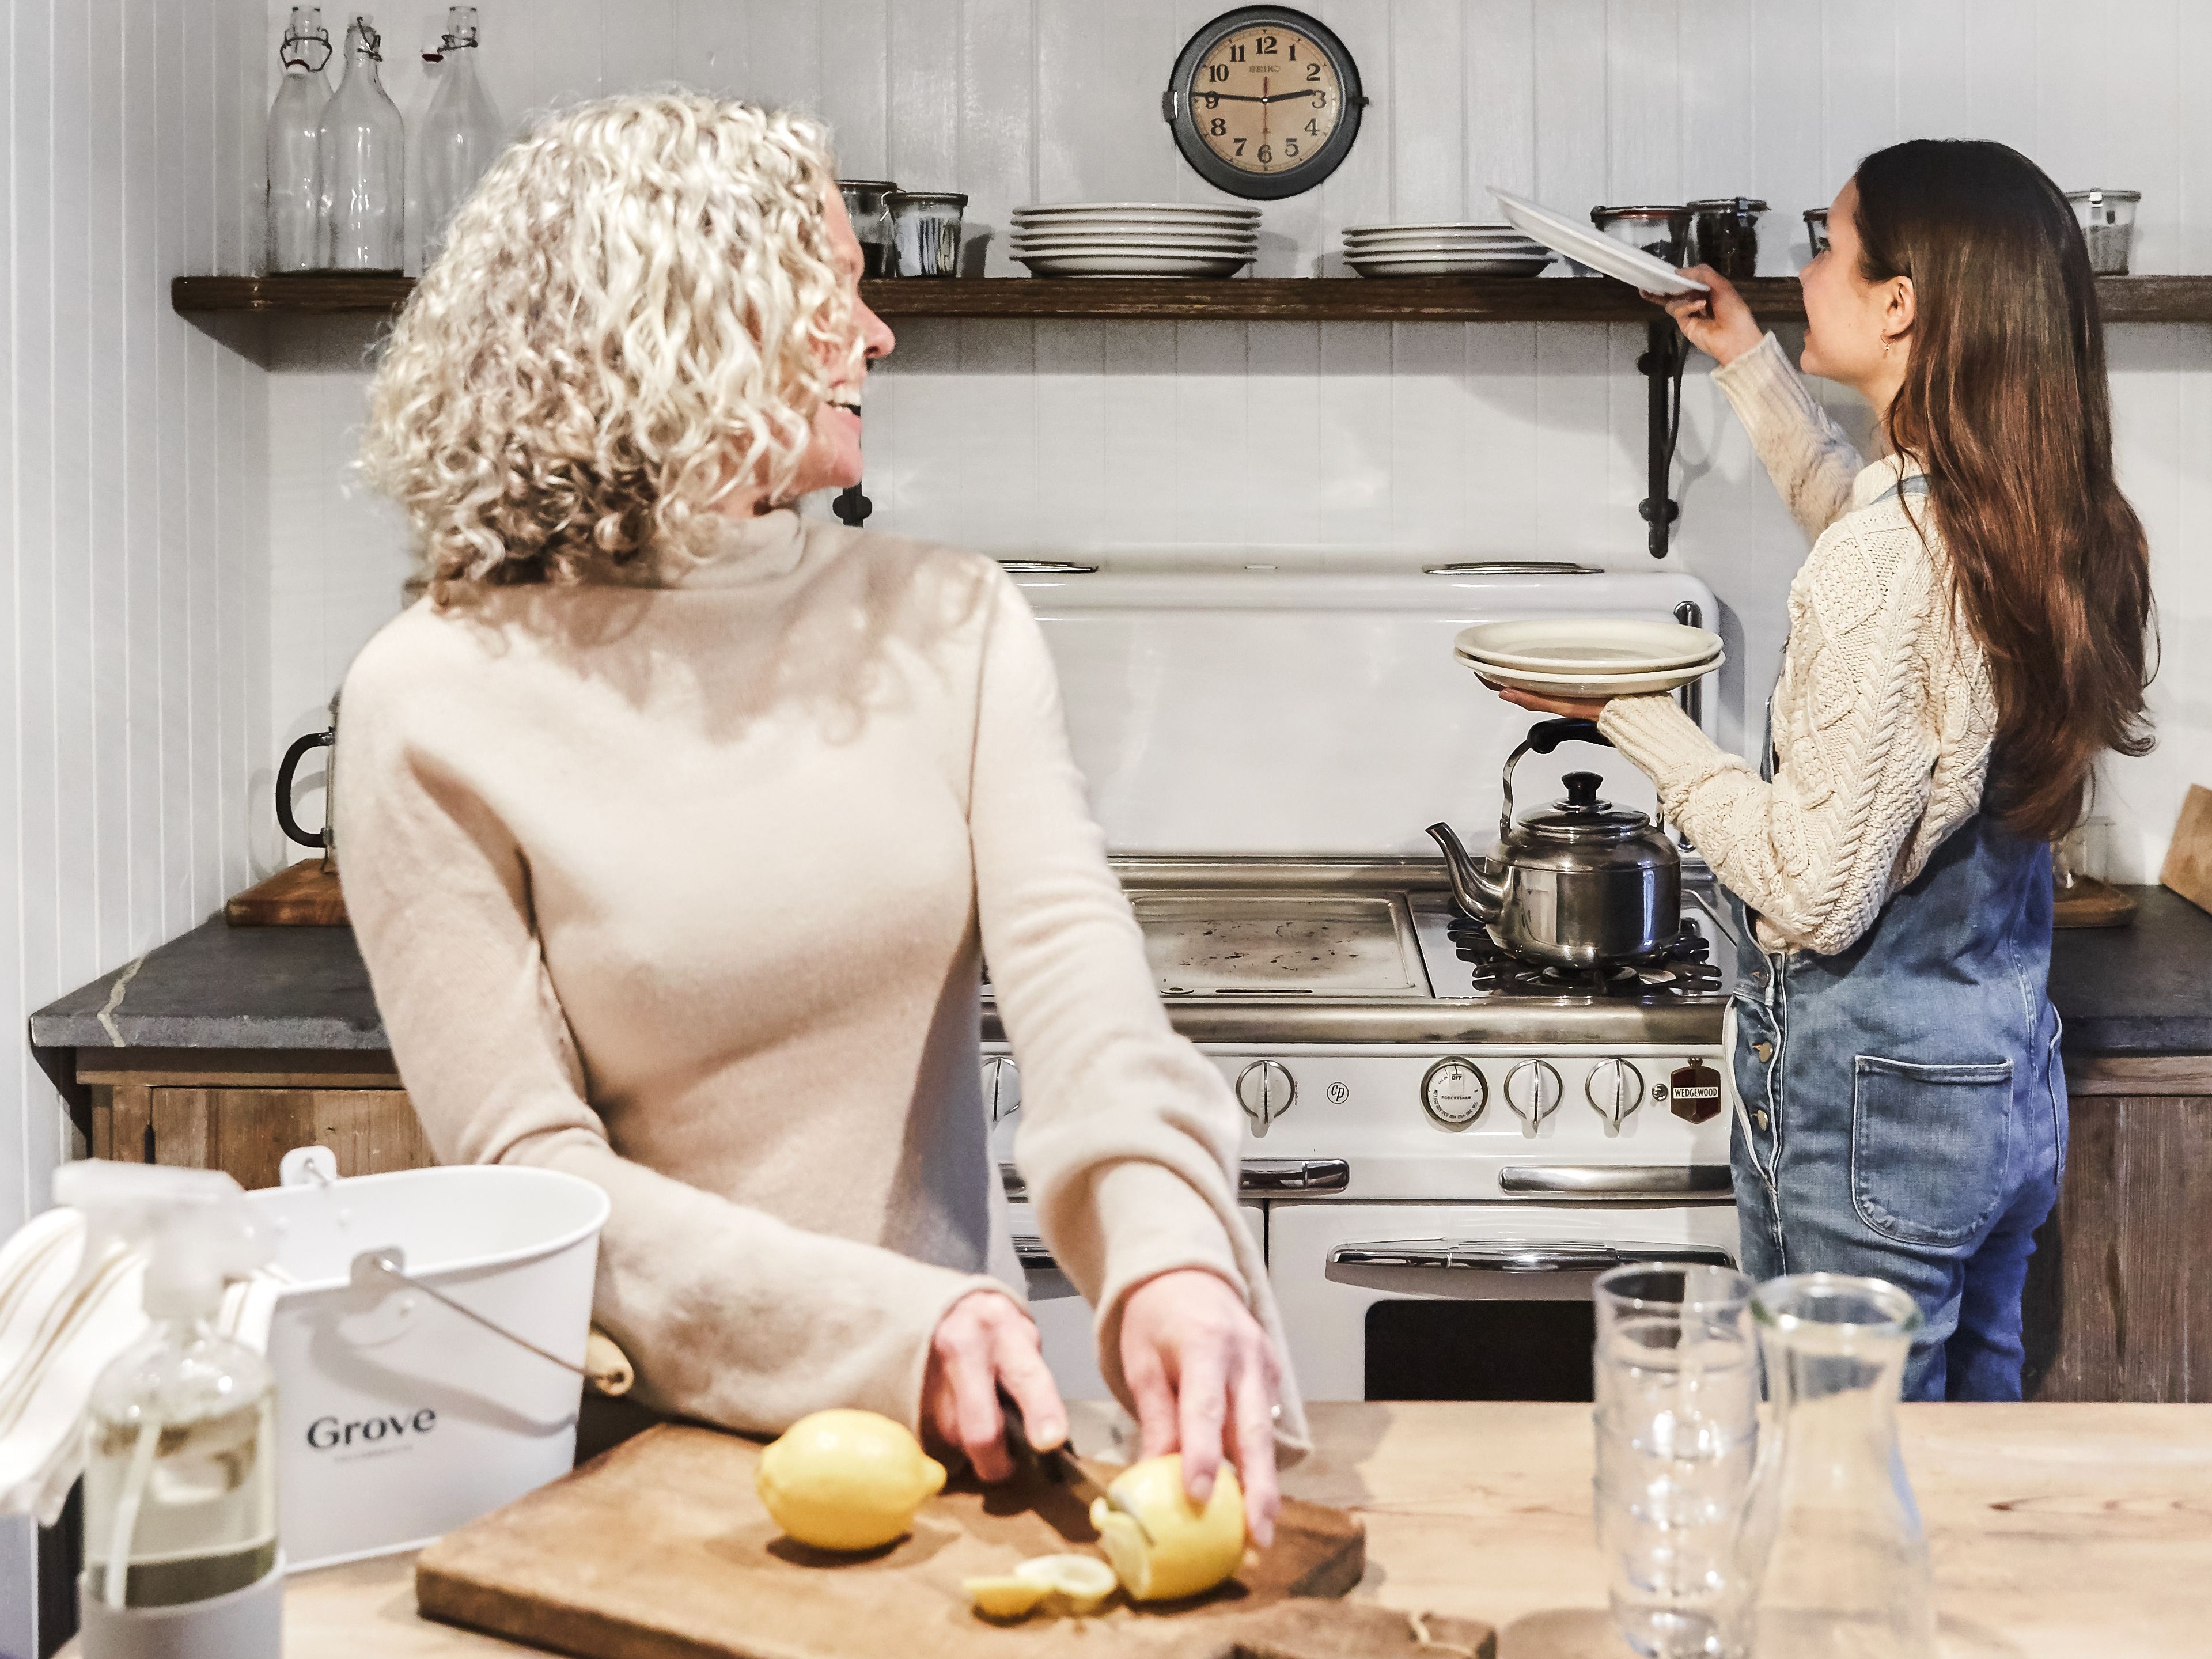 Image of older woman cutting vegetables on cutting board looking behind her at younger woman putting away dishes above stove